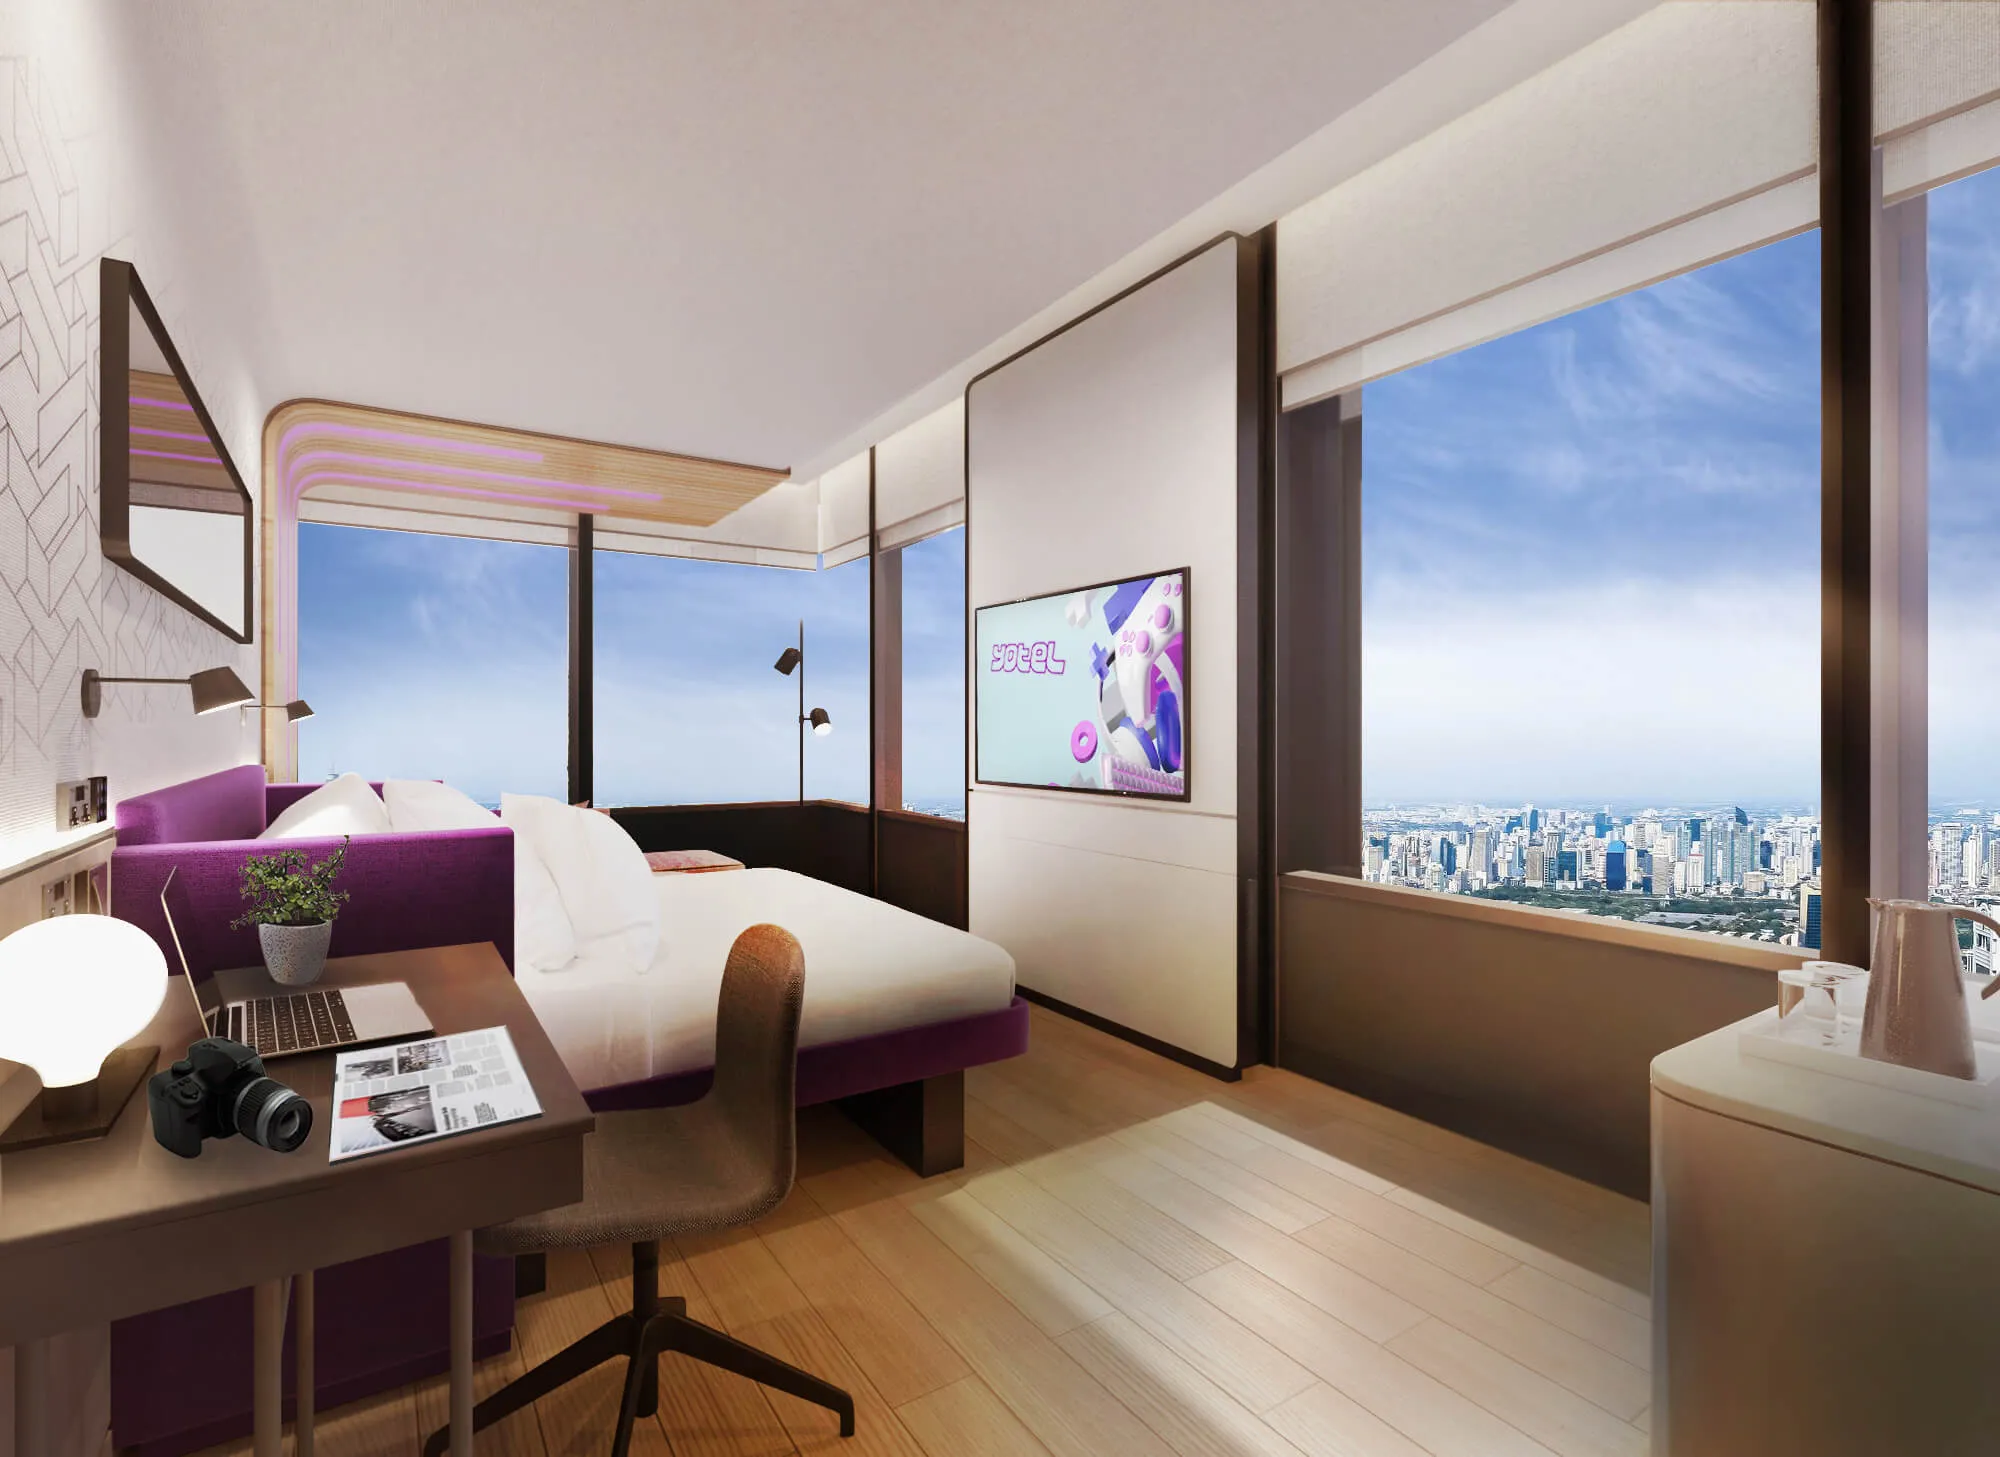 Thailand’s 1st YOTEL to Open at Cloud 11